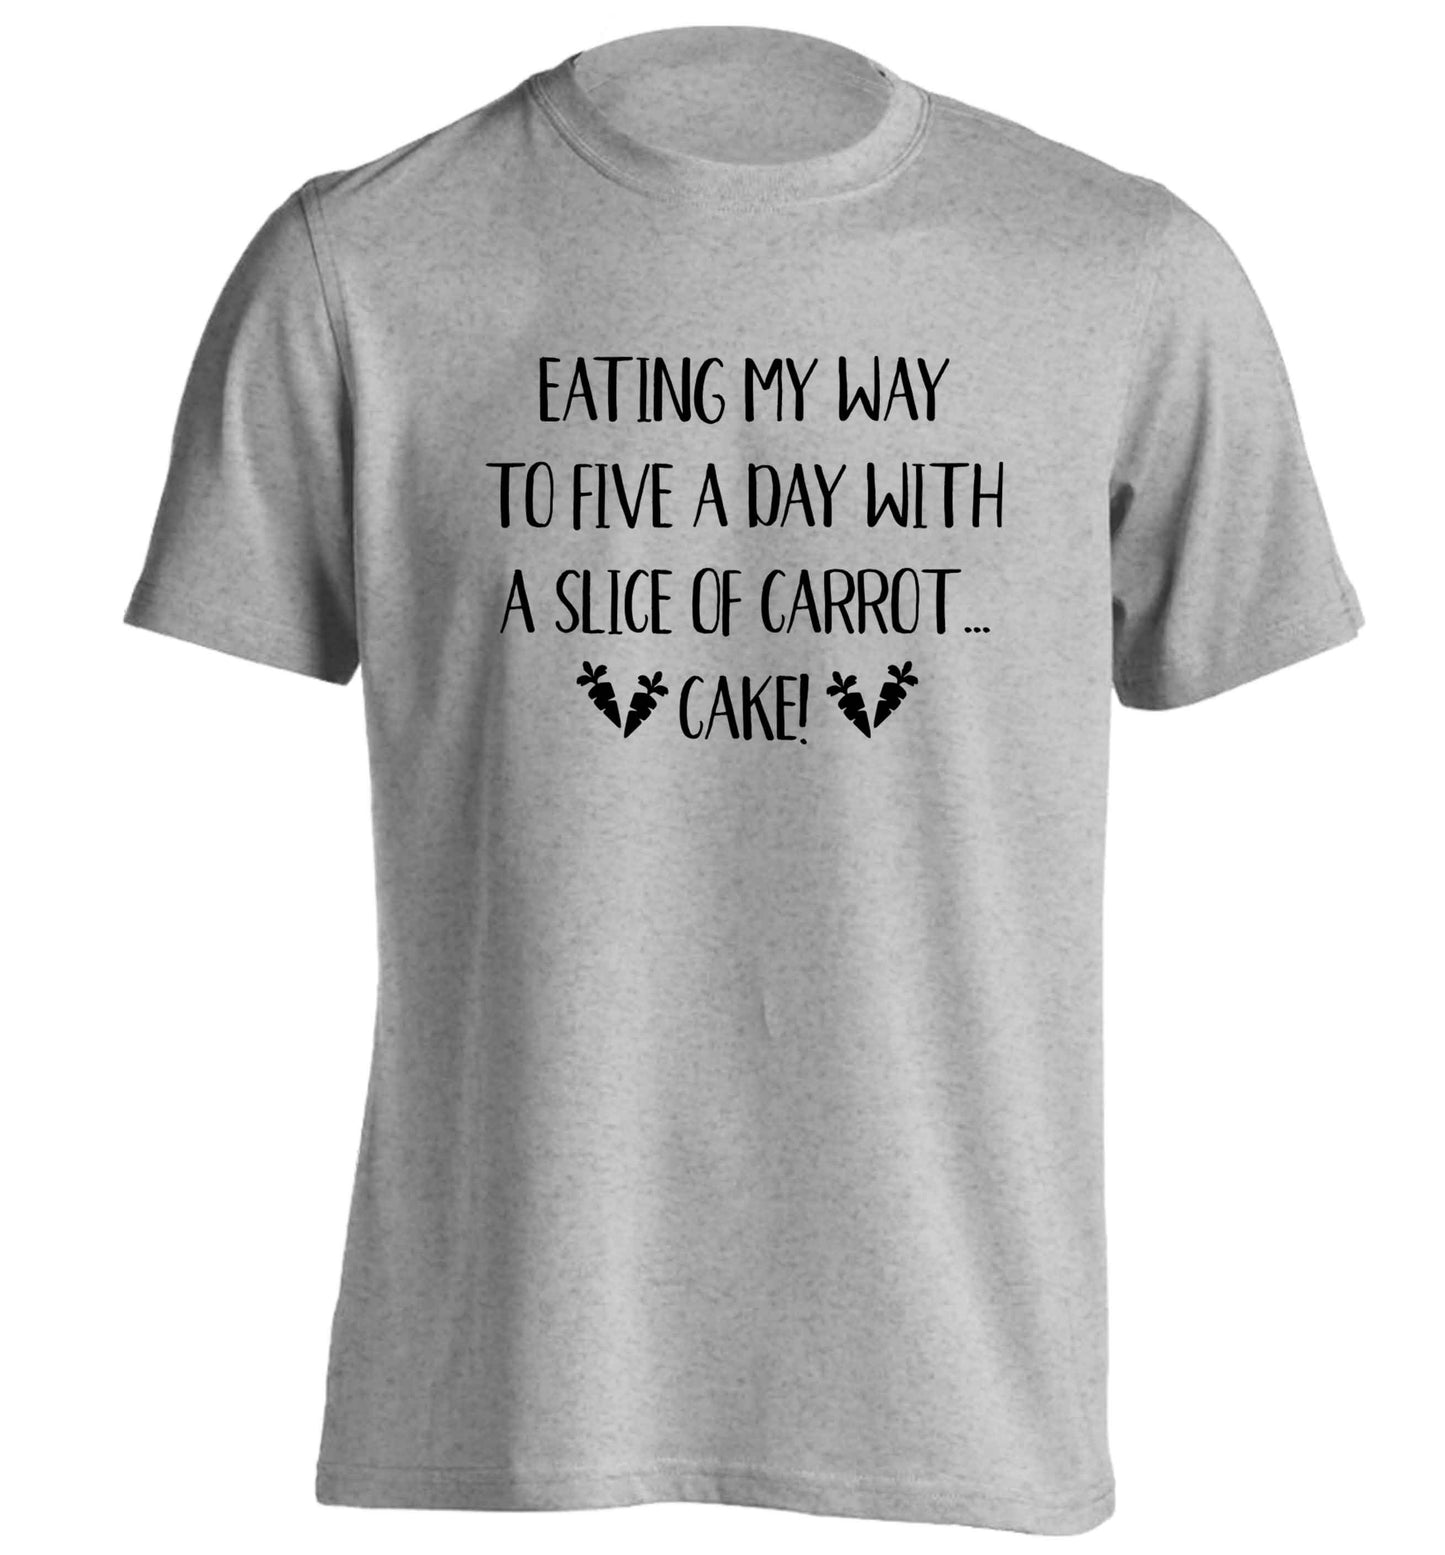 Eating my way to five a day with a slice of carrot cake day adults unisex grey Tshirt 2XL